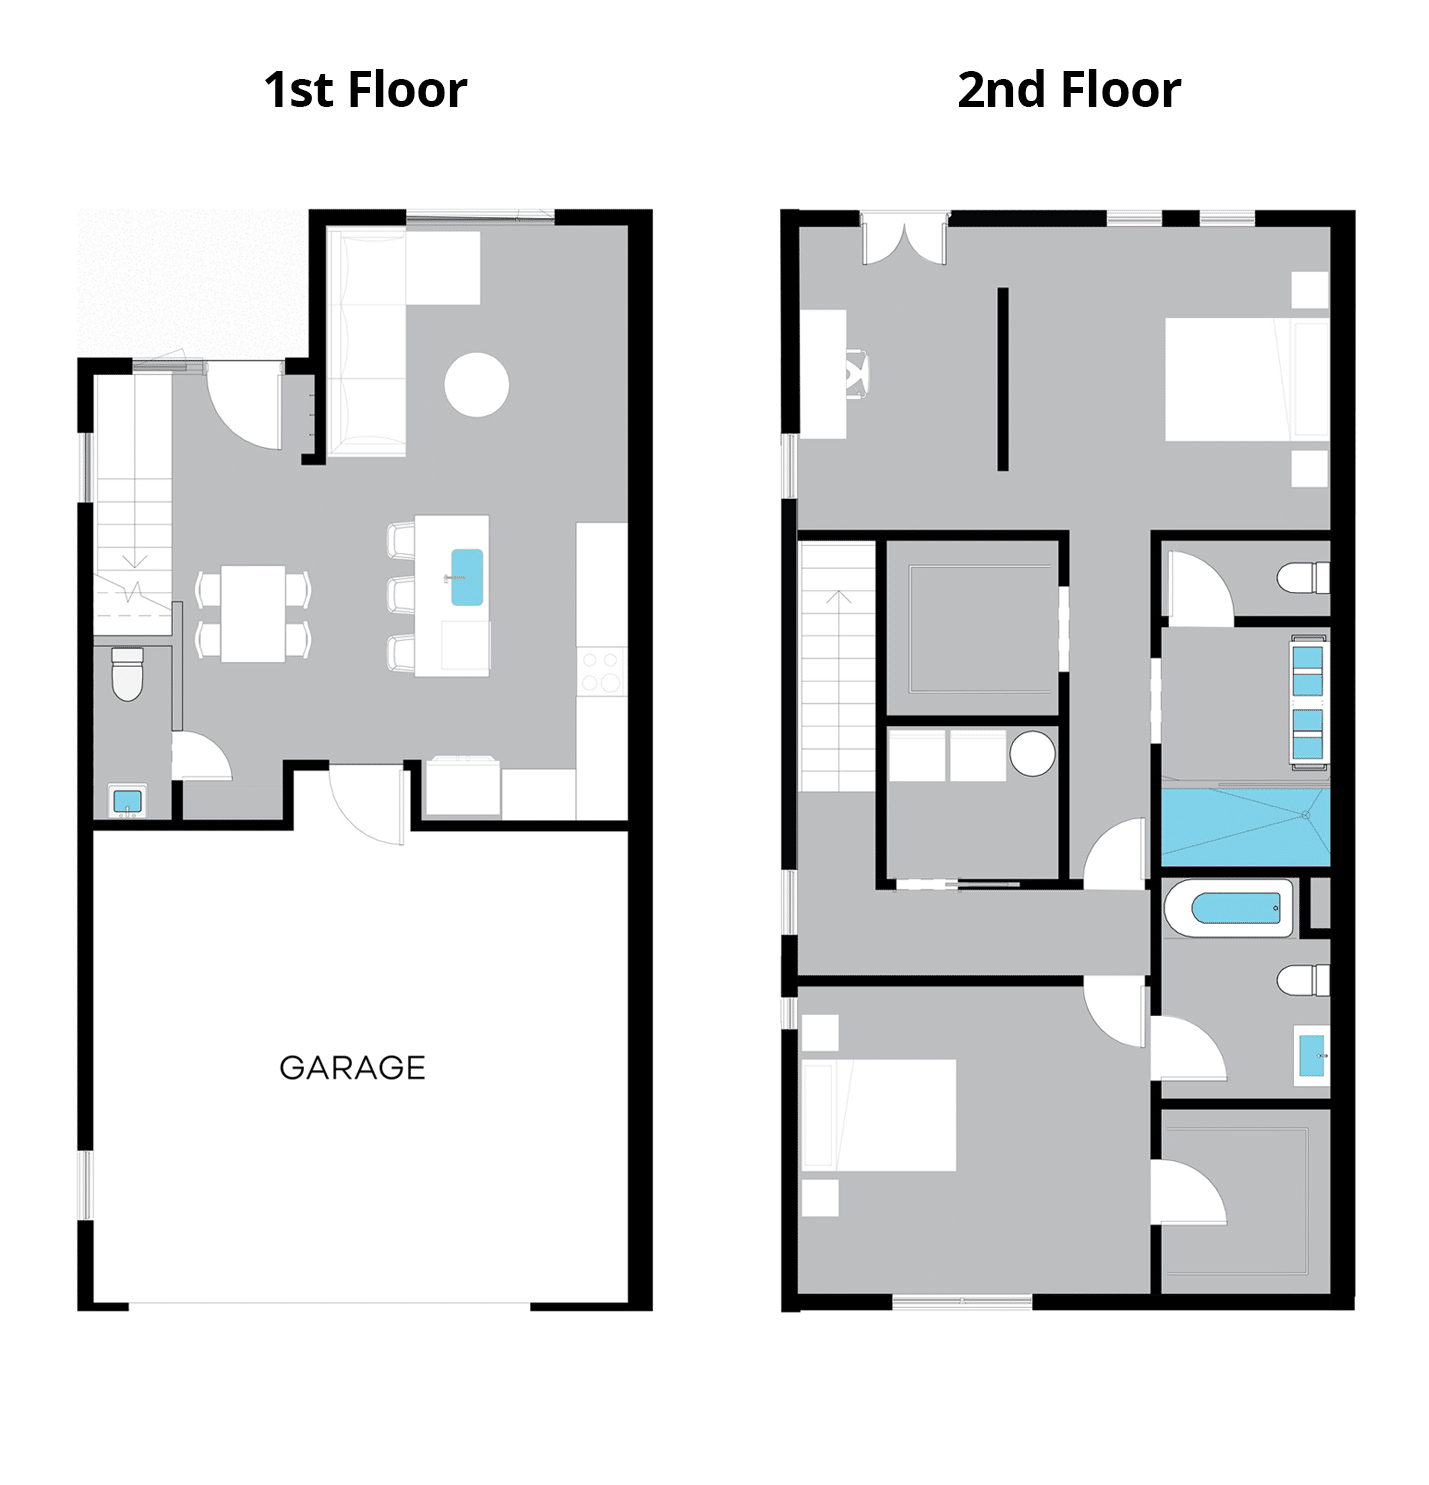 2 Bedroom Floorplan in the 92 Ave Residences Westminster Colorado Townhome Community